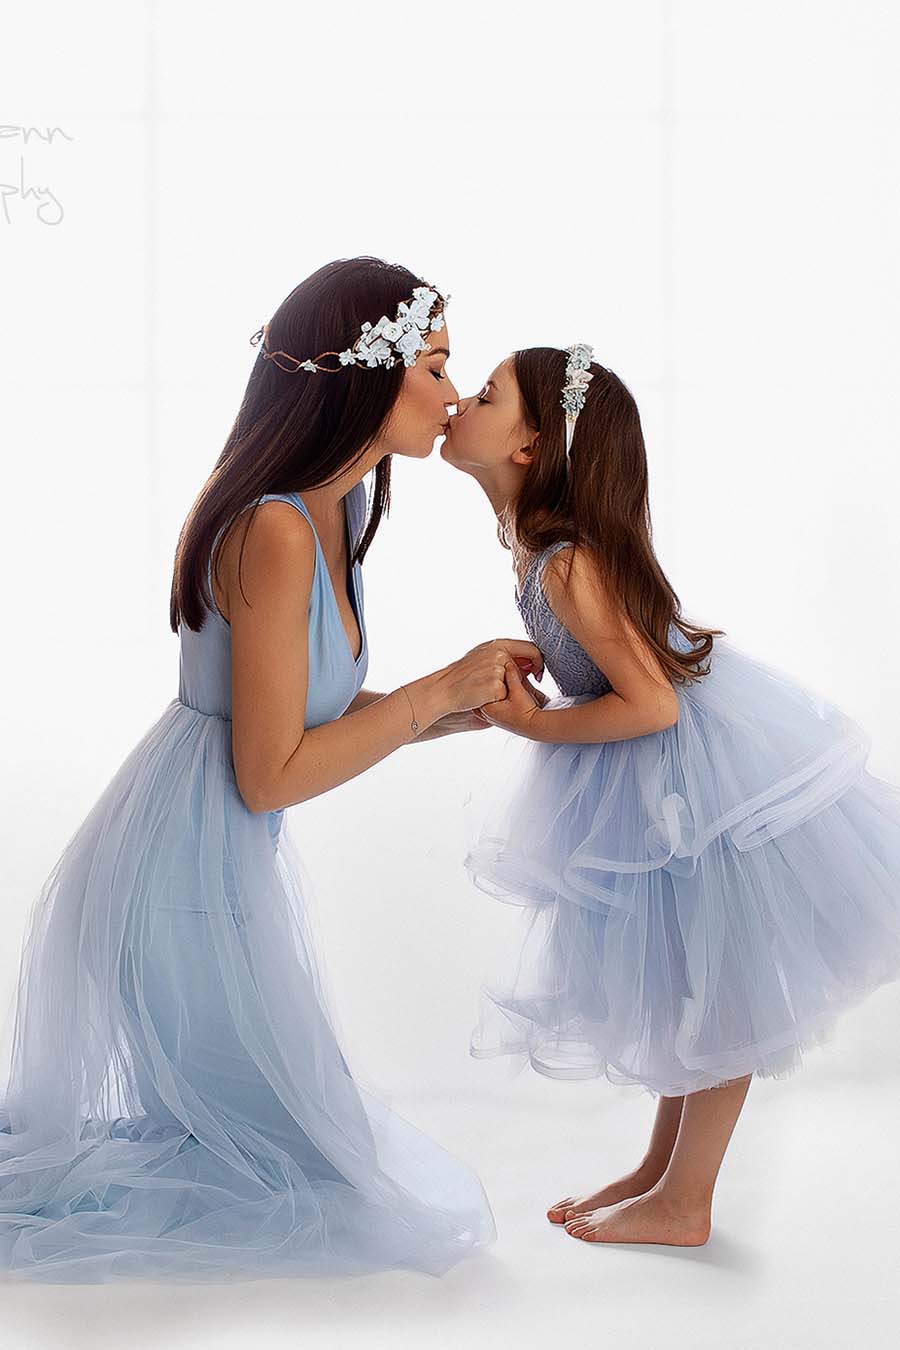 mom and daughter are kissing each other during a close up. they both wear matching outfits without sleeves and tulle skirt. their dresses are light blue.